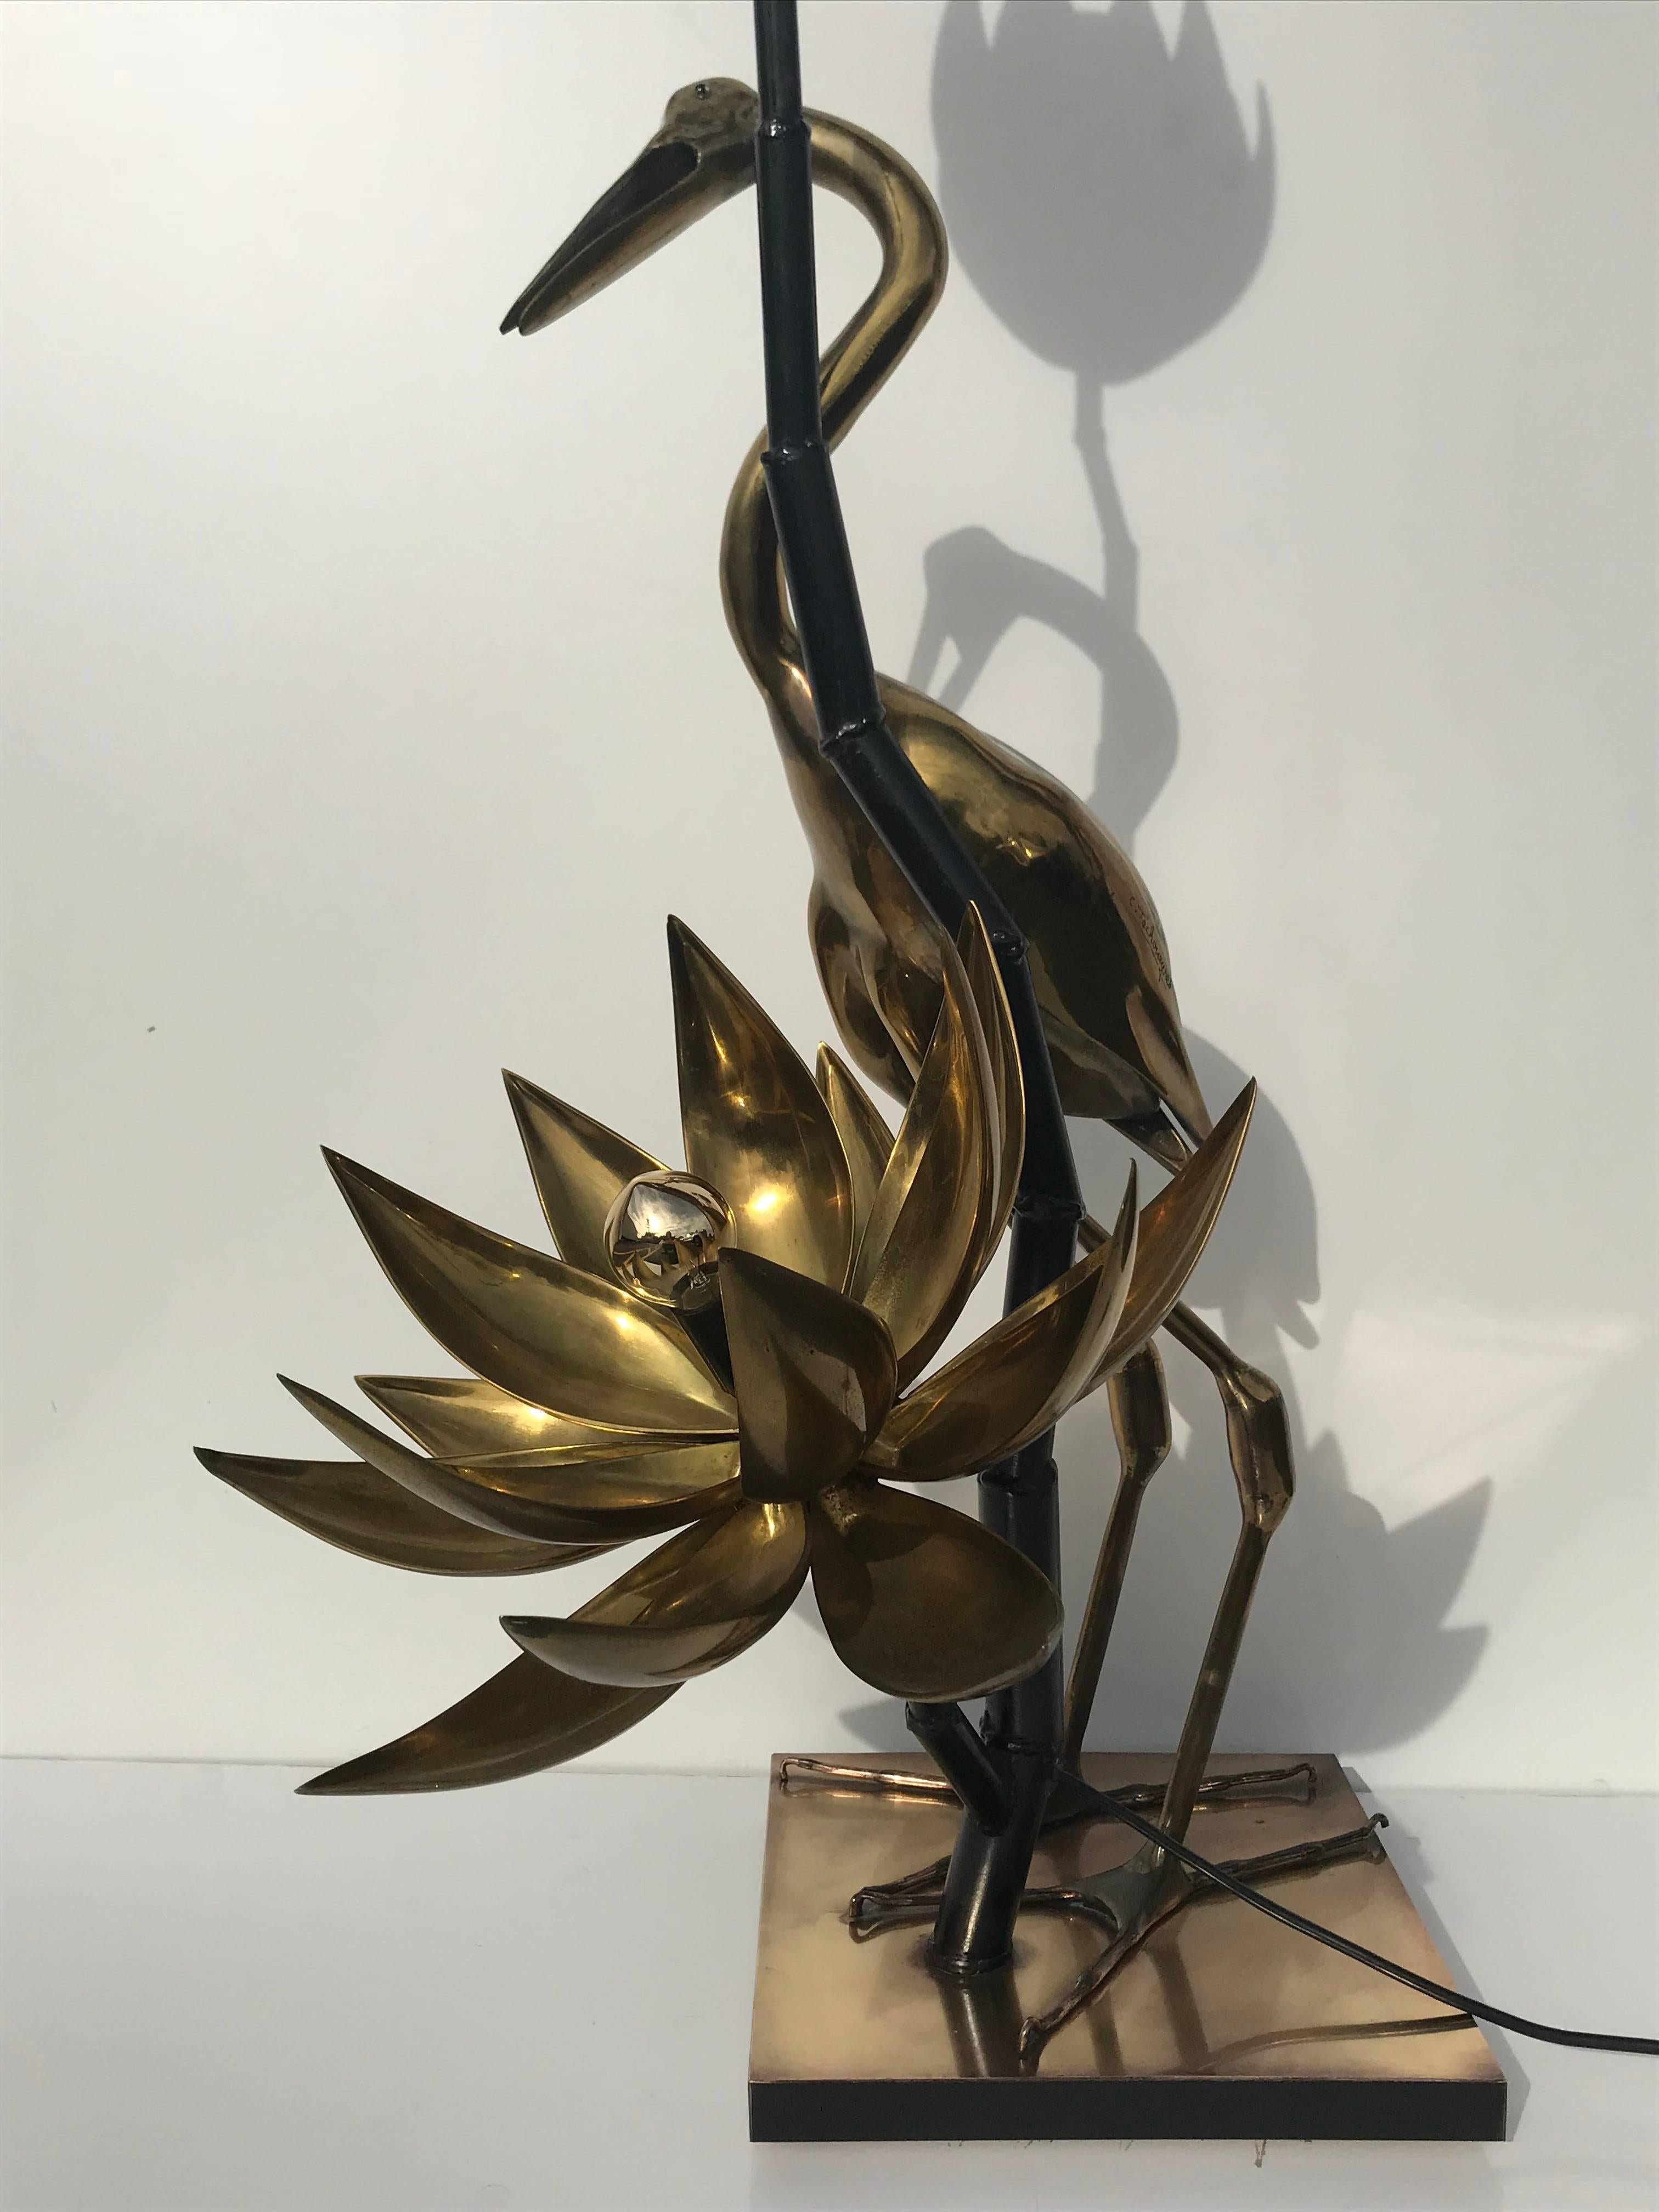 Brass lotus floor lamp by C. Techoueyres
Base is 12 inches by 12 inches
Has on/off foot switch. Requires one up to 60watt regular bulb and one E14 base up to 40 watt bulb.
   